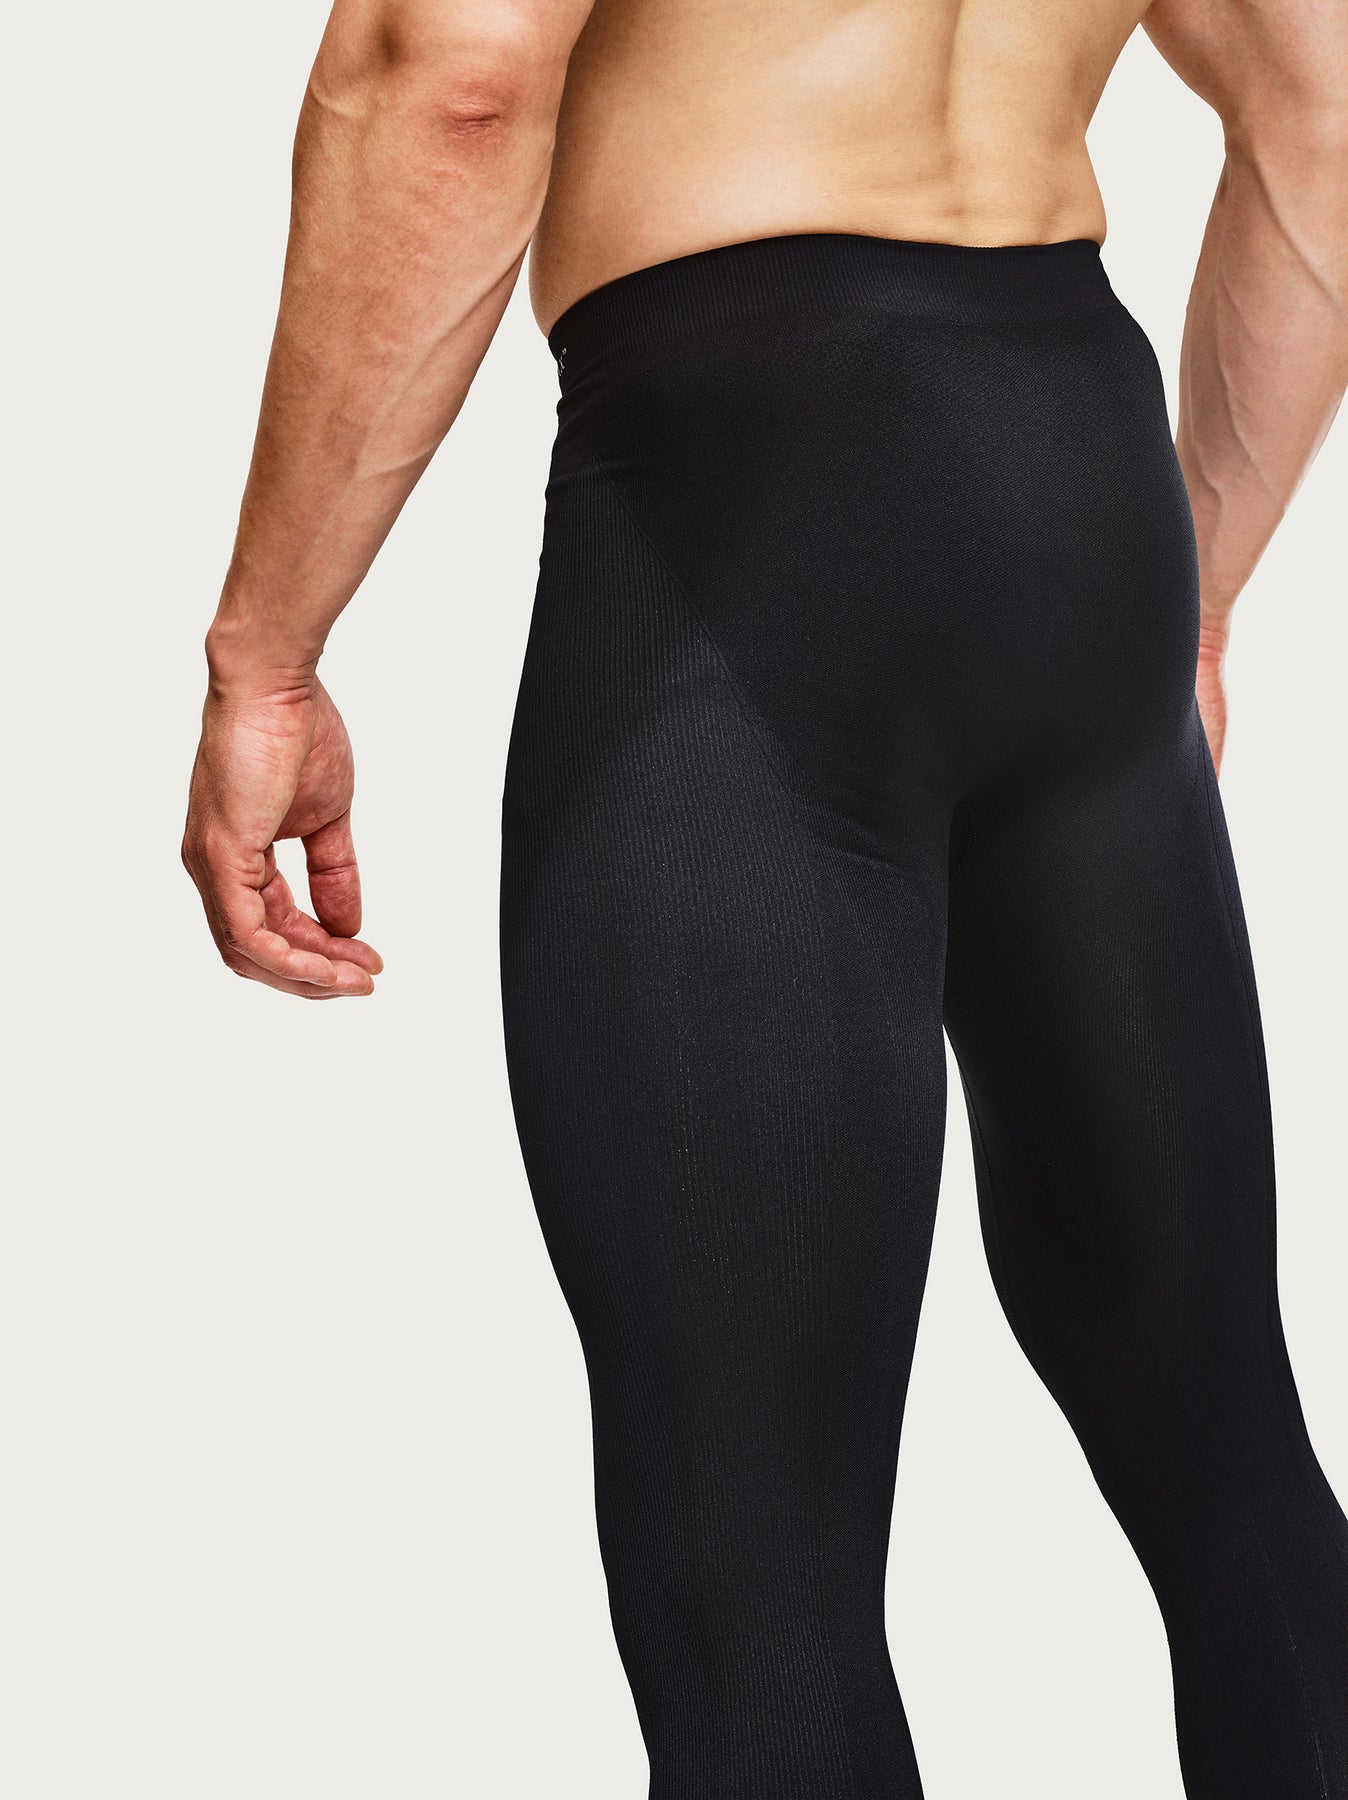 Compression Tights: Mens, Women, Recovery - DME-Direct